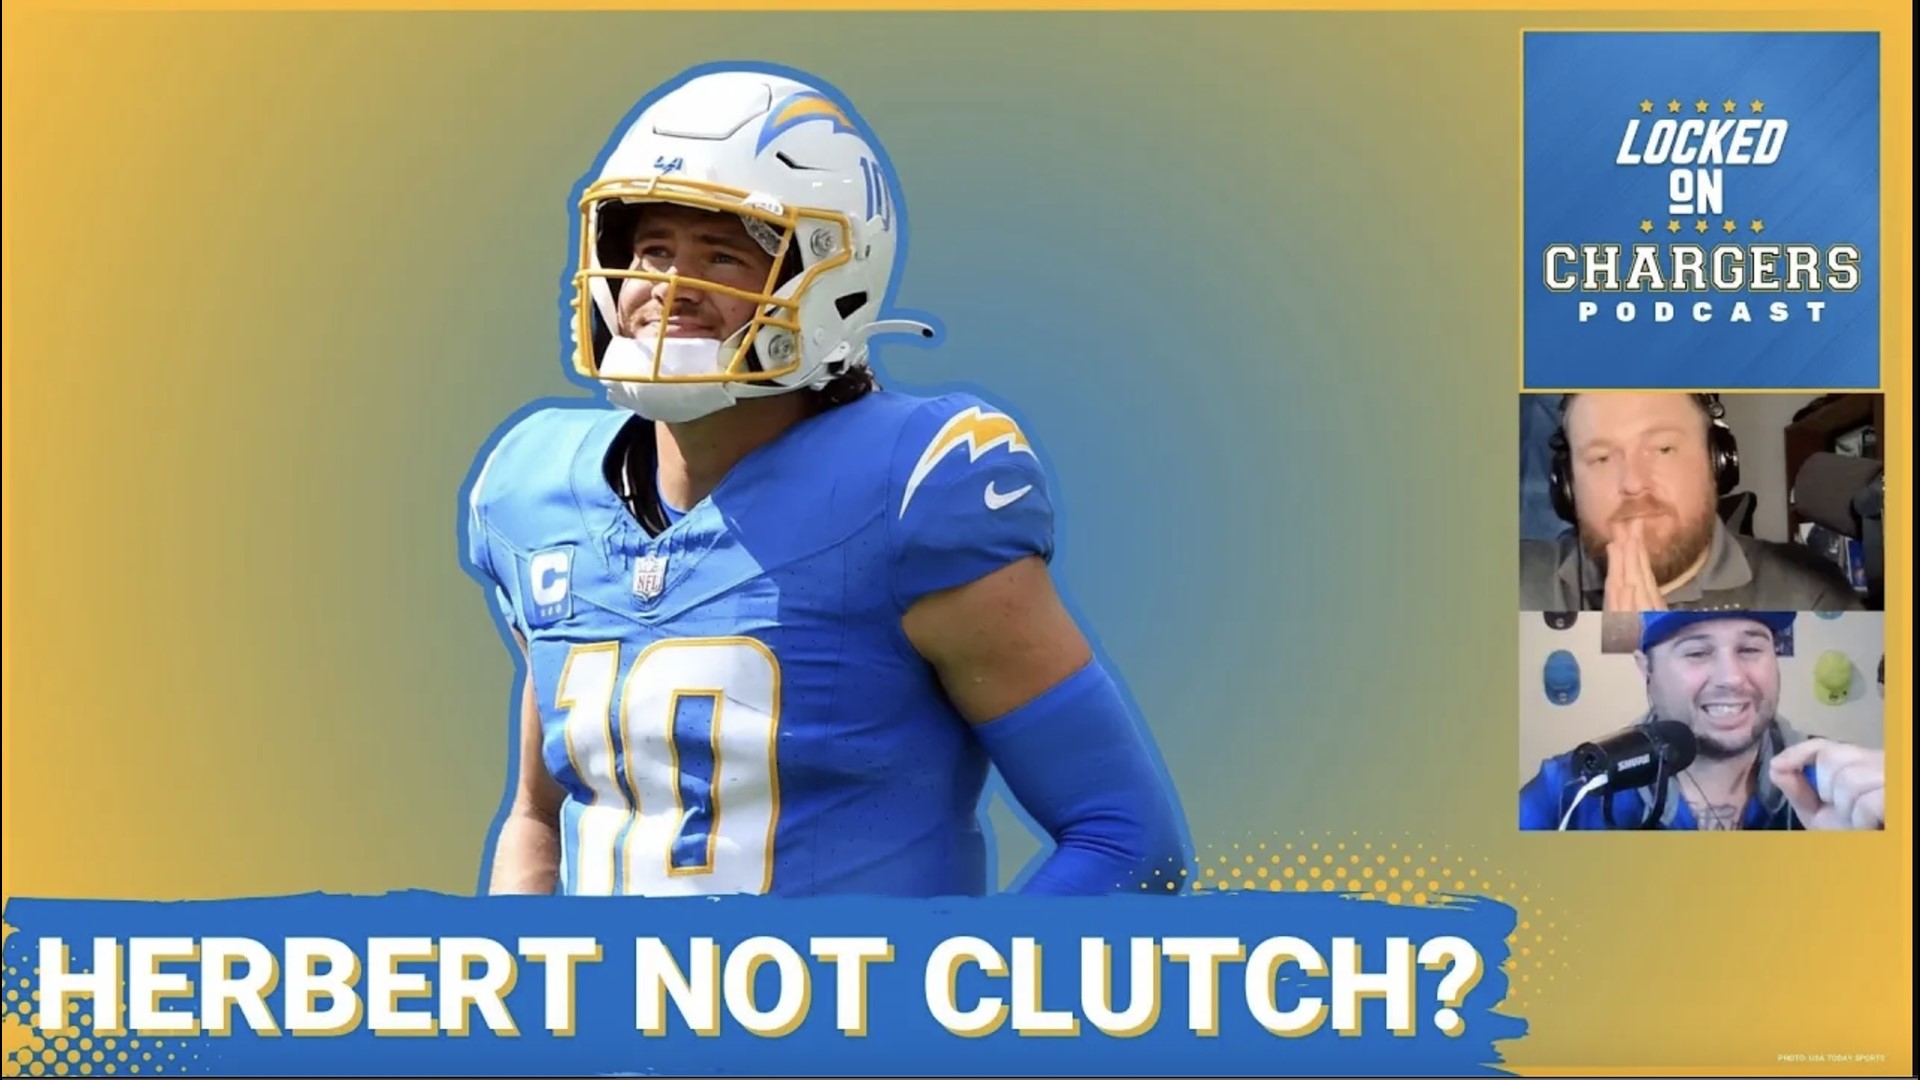 Justin Herbert has been criticized after the Chargers 0-2 start, and specifically his ability to finish close games has come under scrutiny.